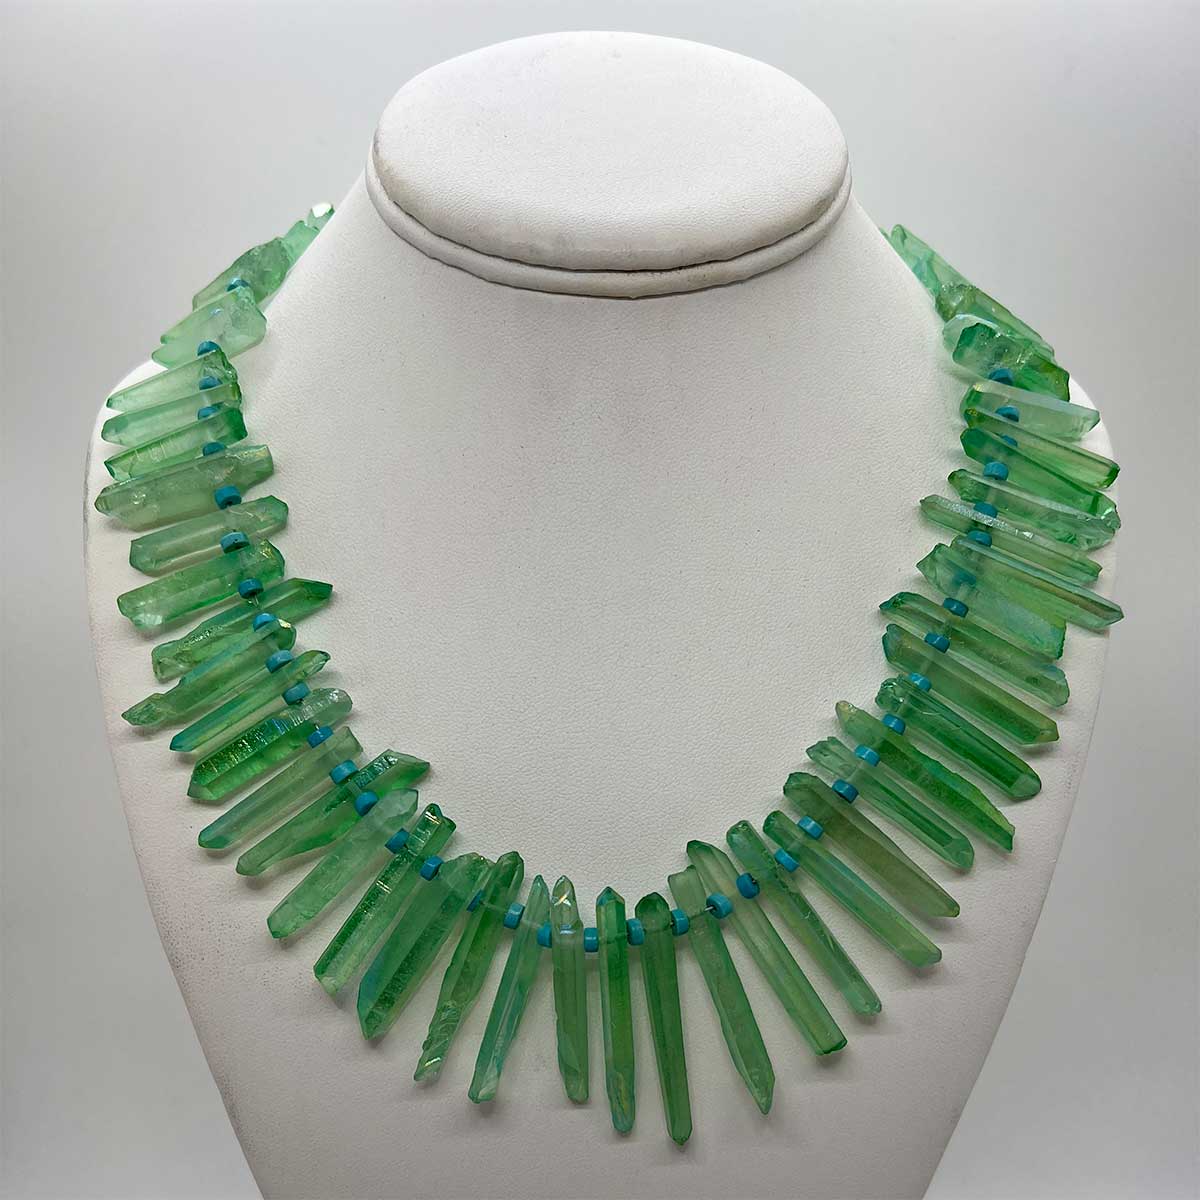 Green Titanium Crystal Necklace by Judy Buntin